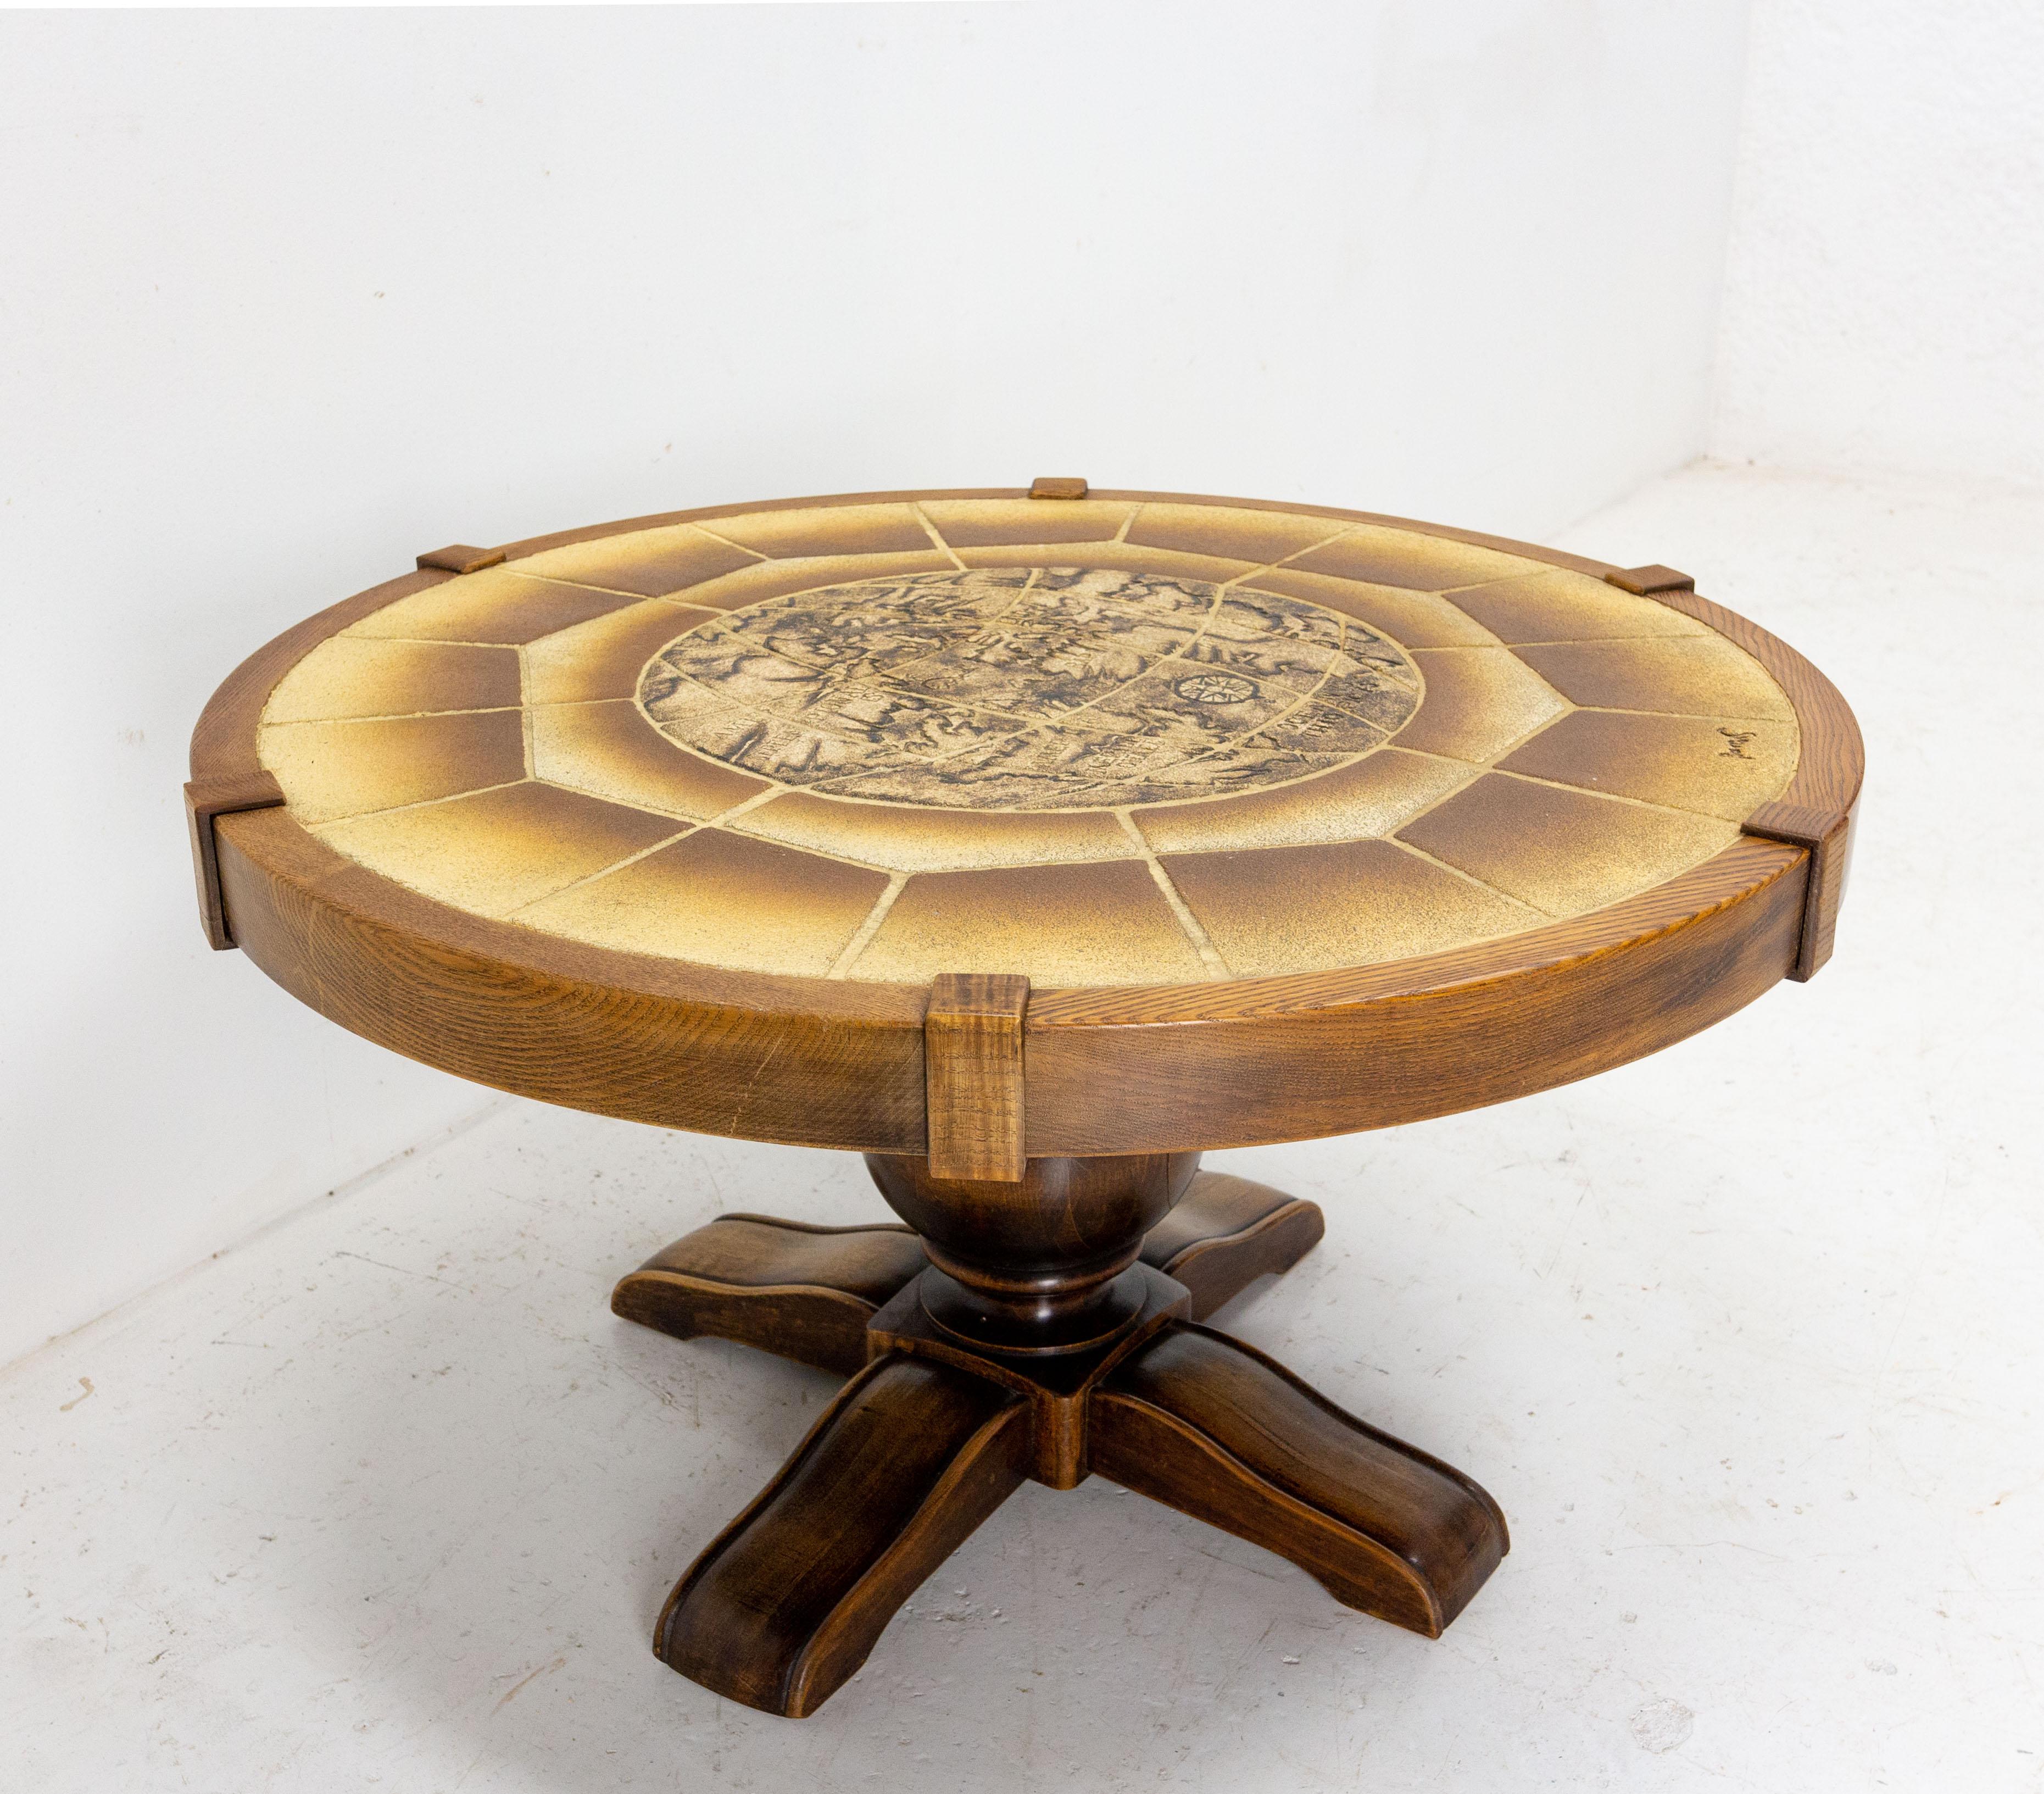 French Round Coffee Table with Vallauris Ceramic World Representation, c. 1970 In Good Condition For Sale In Labrit, Landes